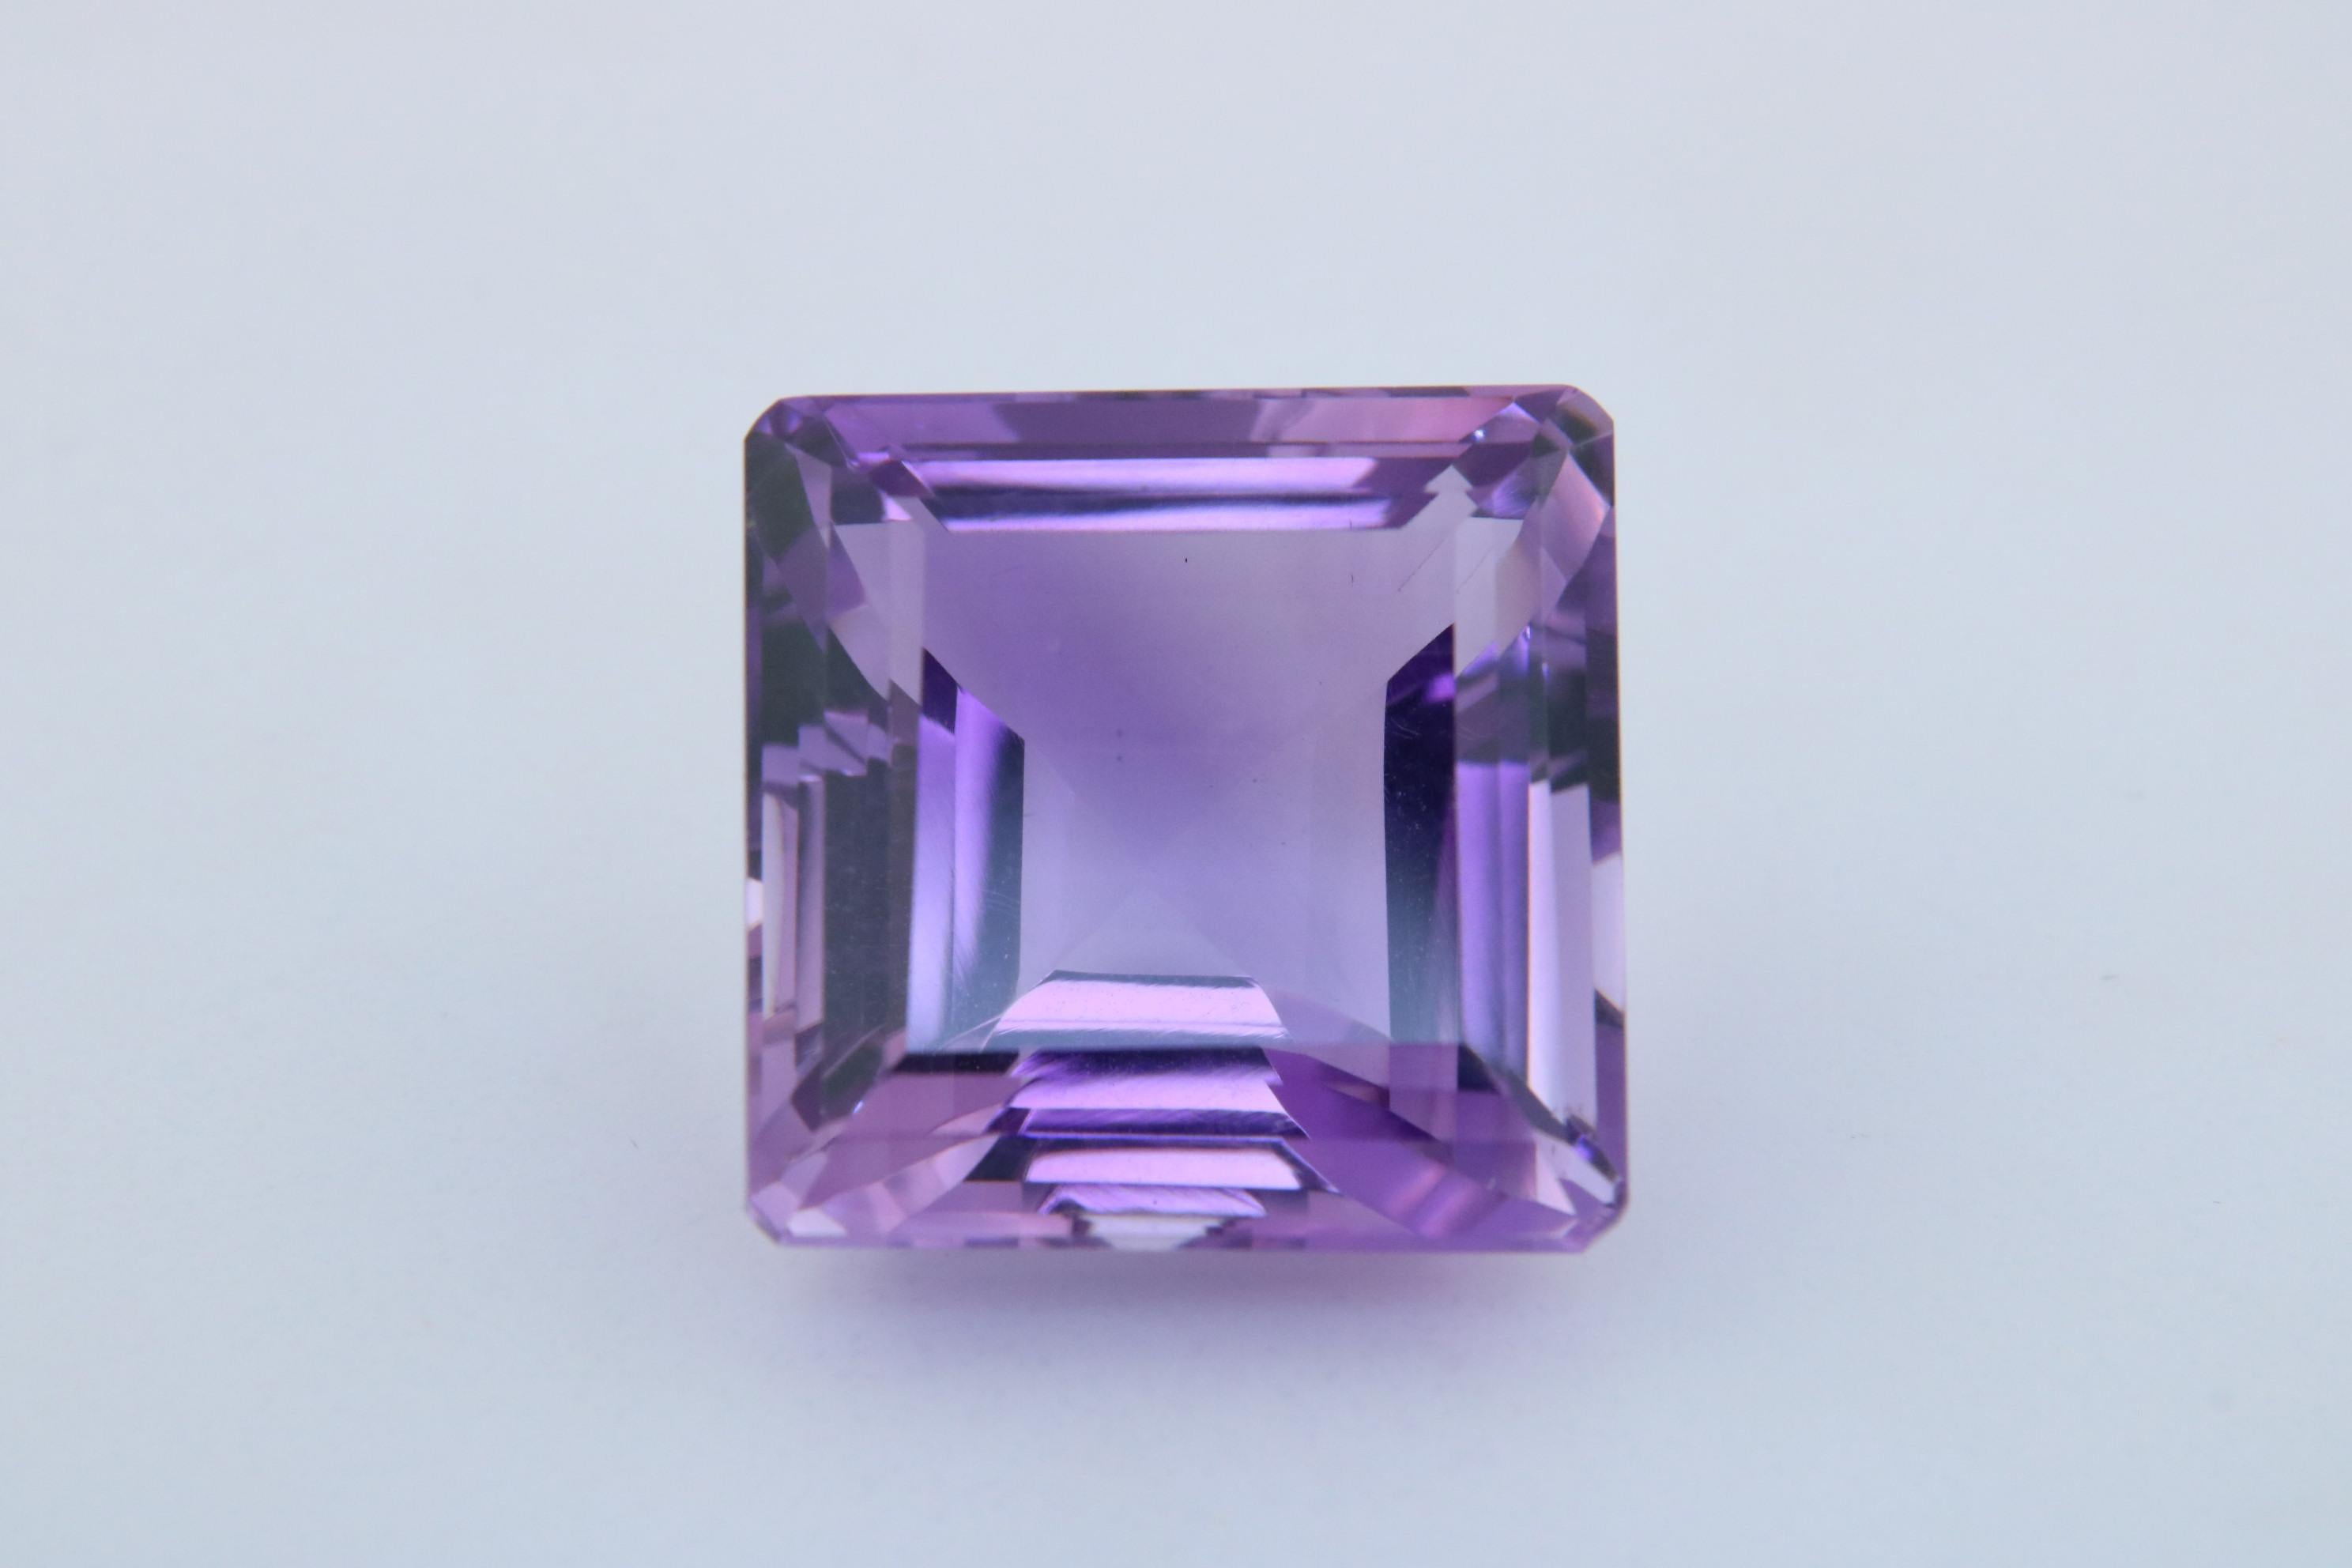 A collector's 52.78 carat, Radiant-Cut Amethyst Gem.

Shape: Octagon
Crown: Step
Pavilion: Step
Dimensions: 21.76 x. 21.61 x 15.20 mm
Color: Purple
Weight: 52.78 Carats

No Heat/Treatment

This stone is available for direct purchase or for the